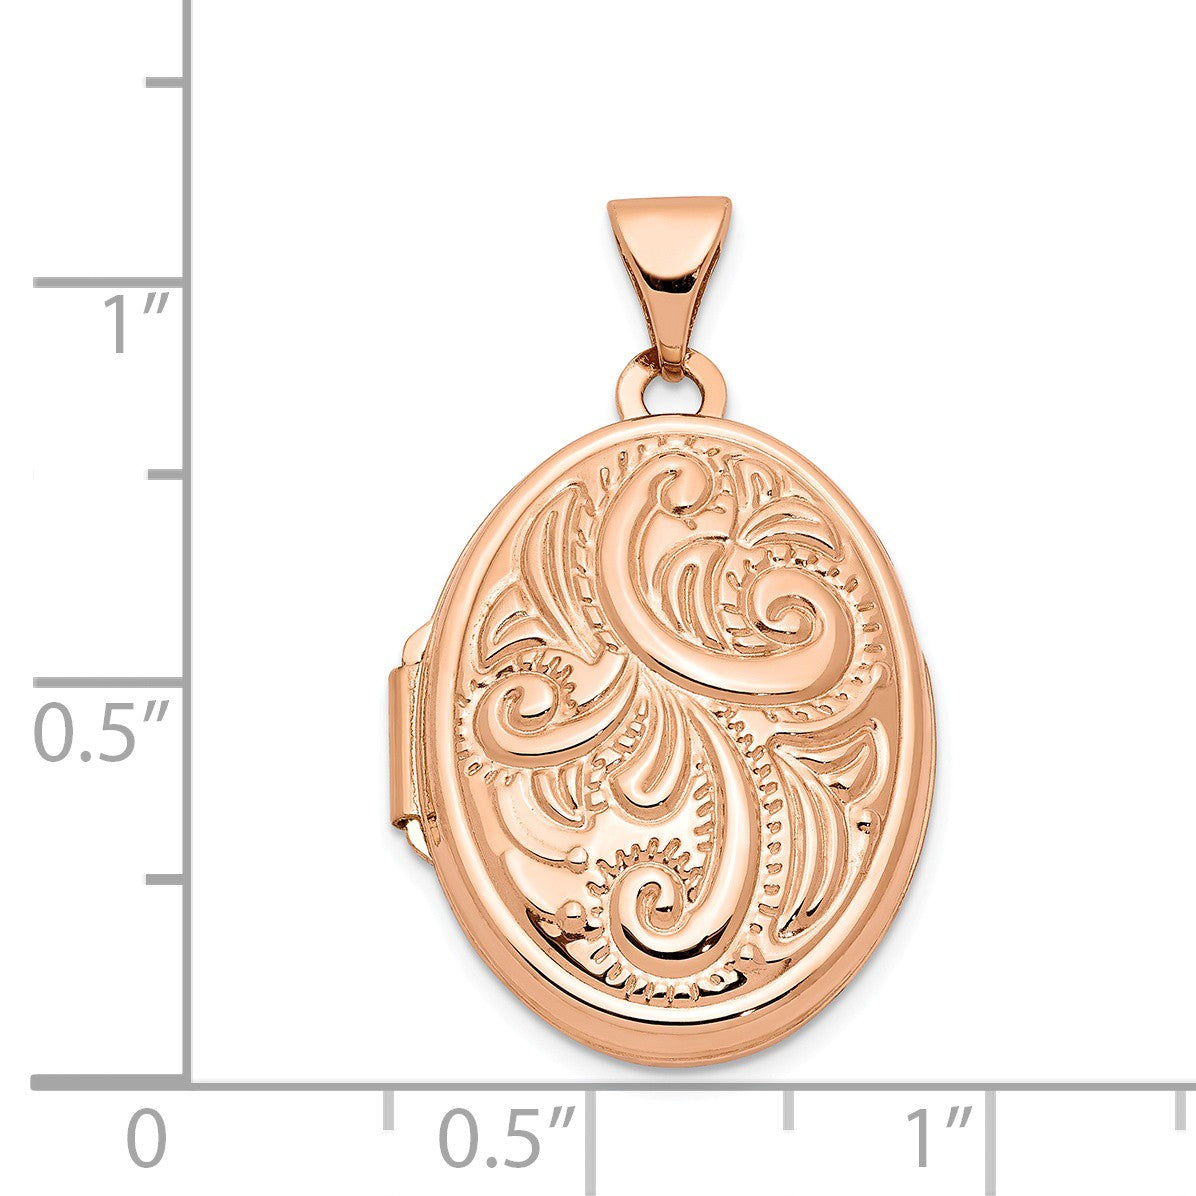 Alternate view of the 14k Rose Gold 21mm Domed Scroll Oval Locket by The Black Bow Jewelry Co.